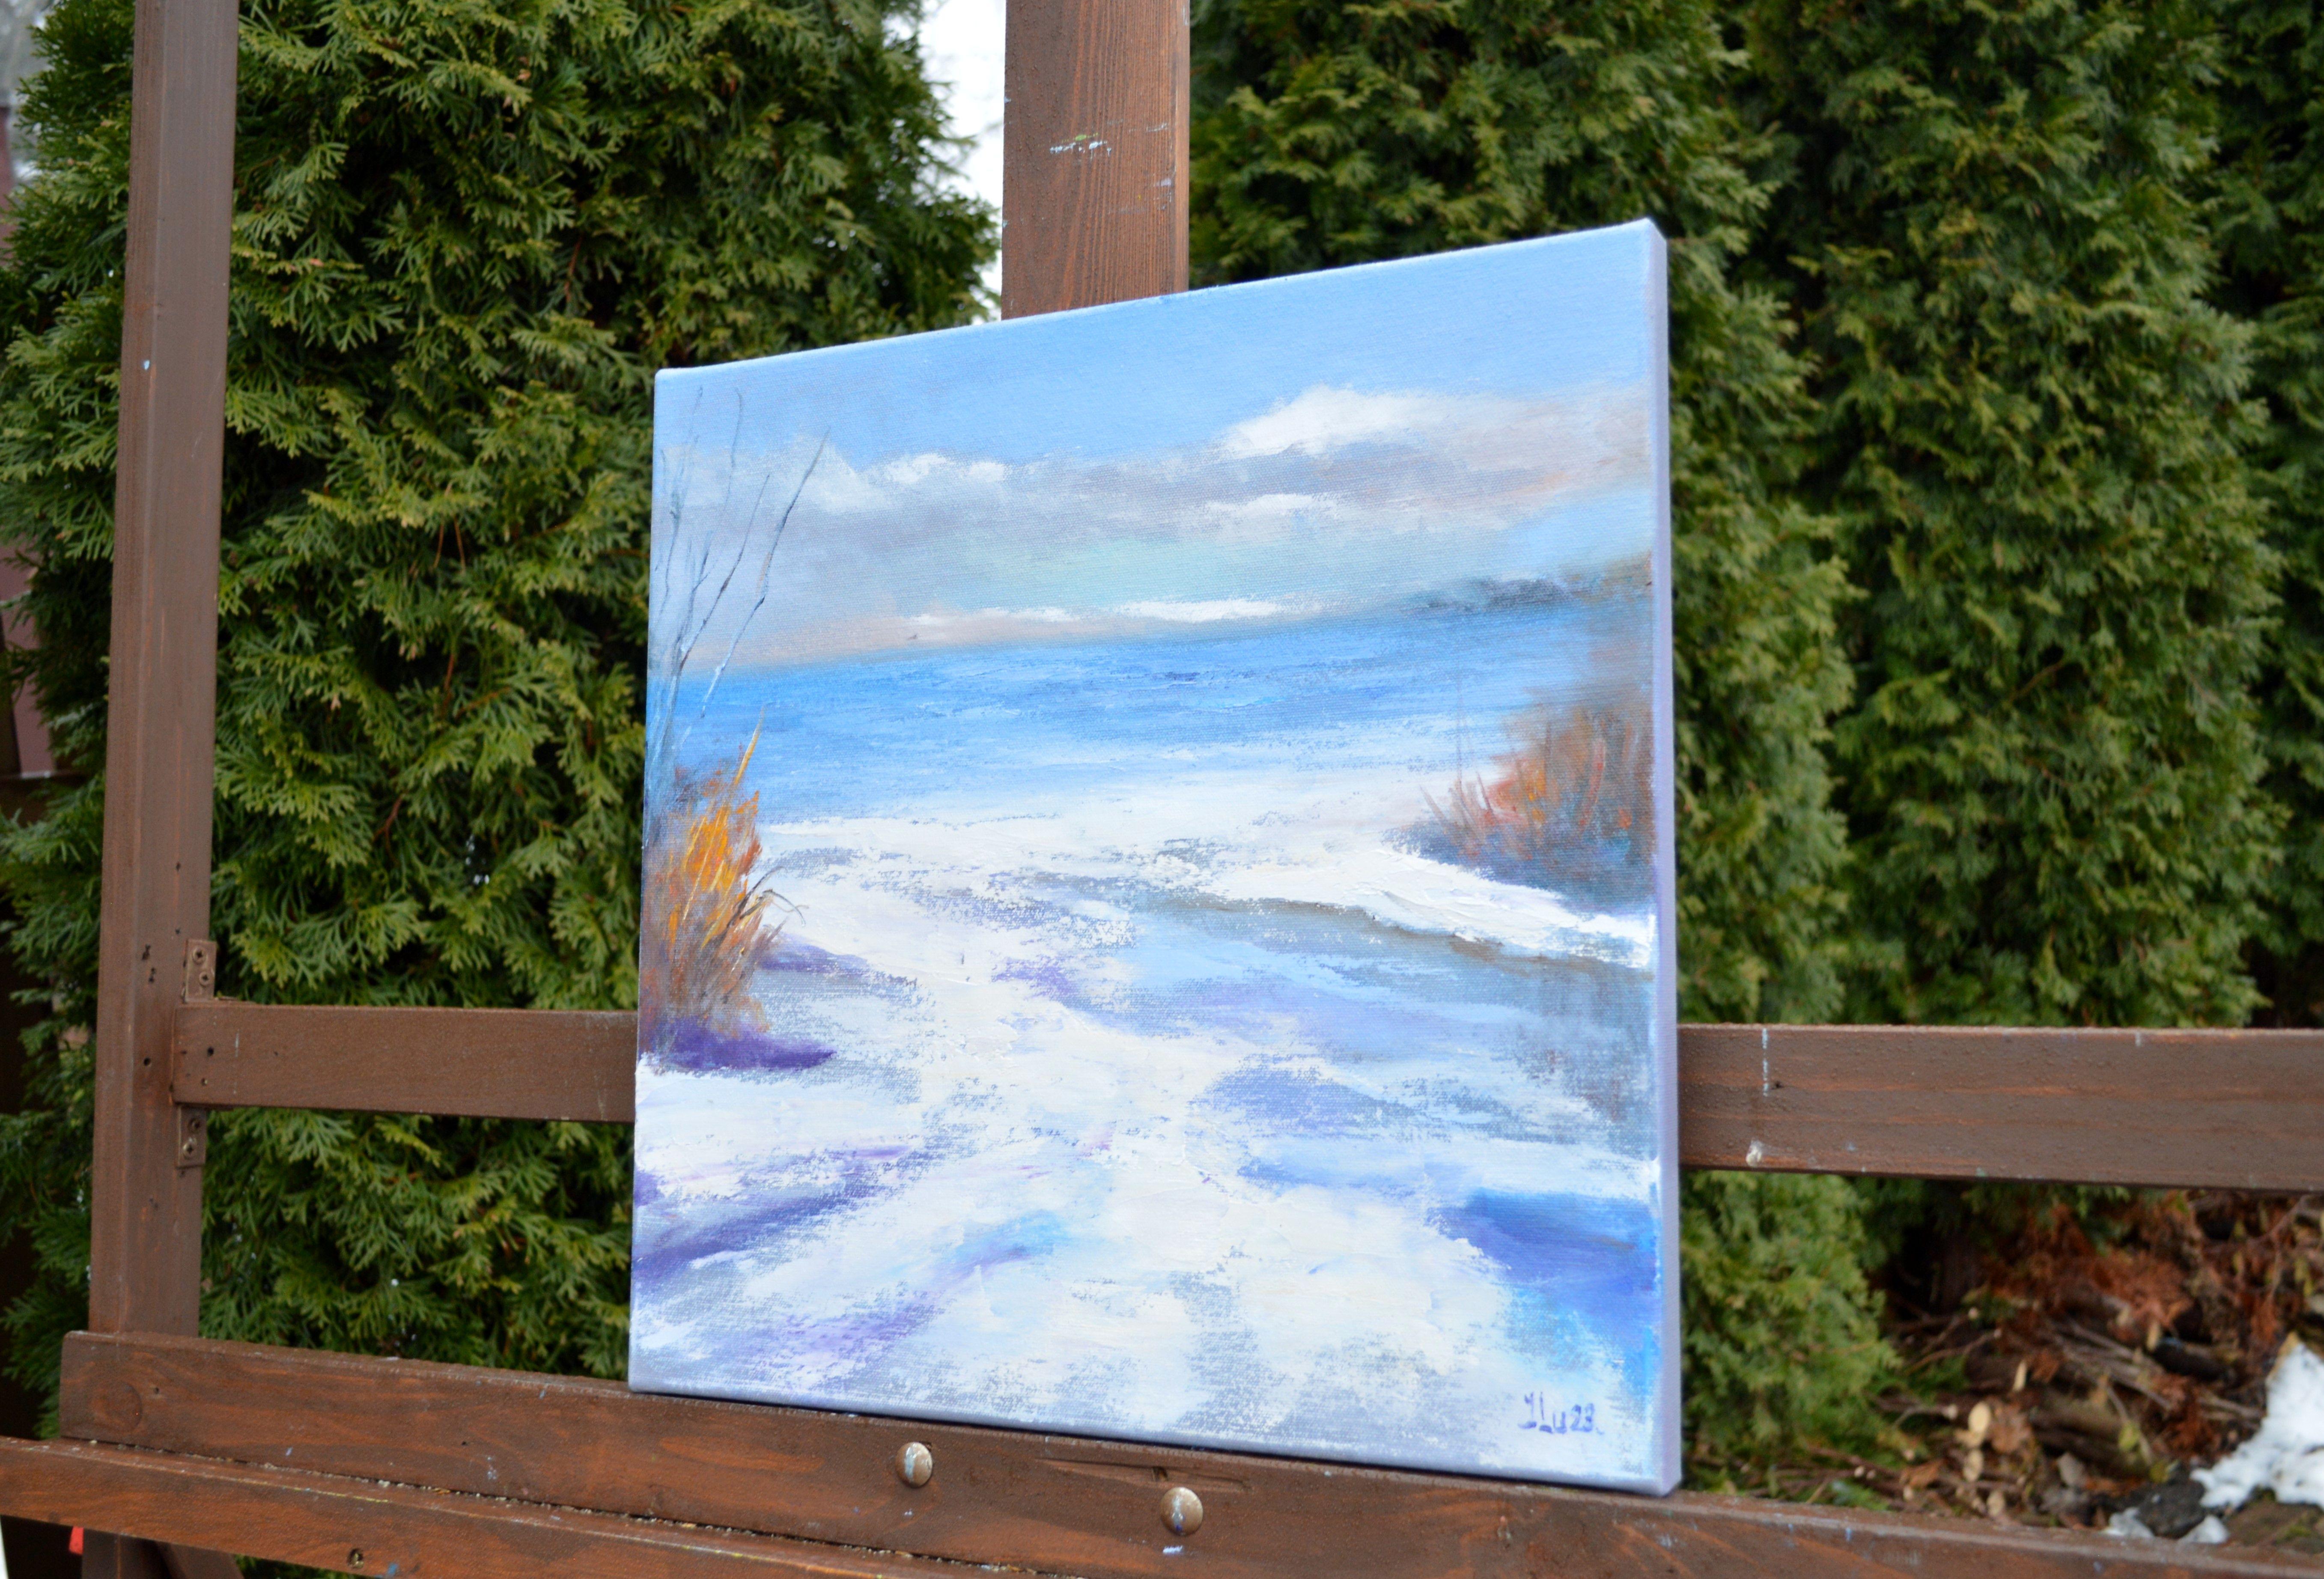 In this canvas, I've poured my soul into capturing the raw, chilling beauty of a serene coastal scene wrapped in the silence of winter. My brushstrokes dance between expressionism and impressionism, infusing life into the cold expanse with oils that